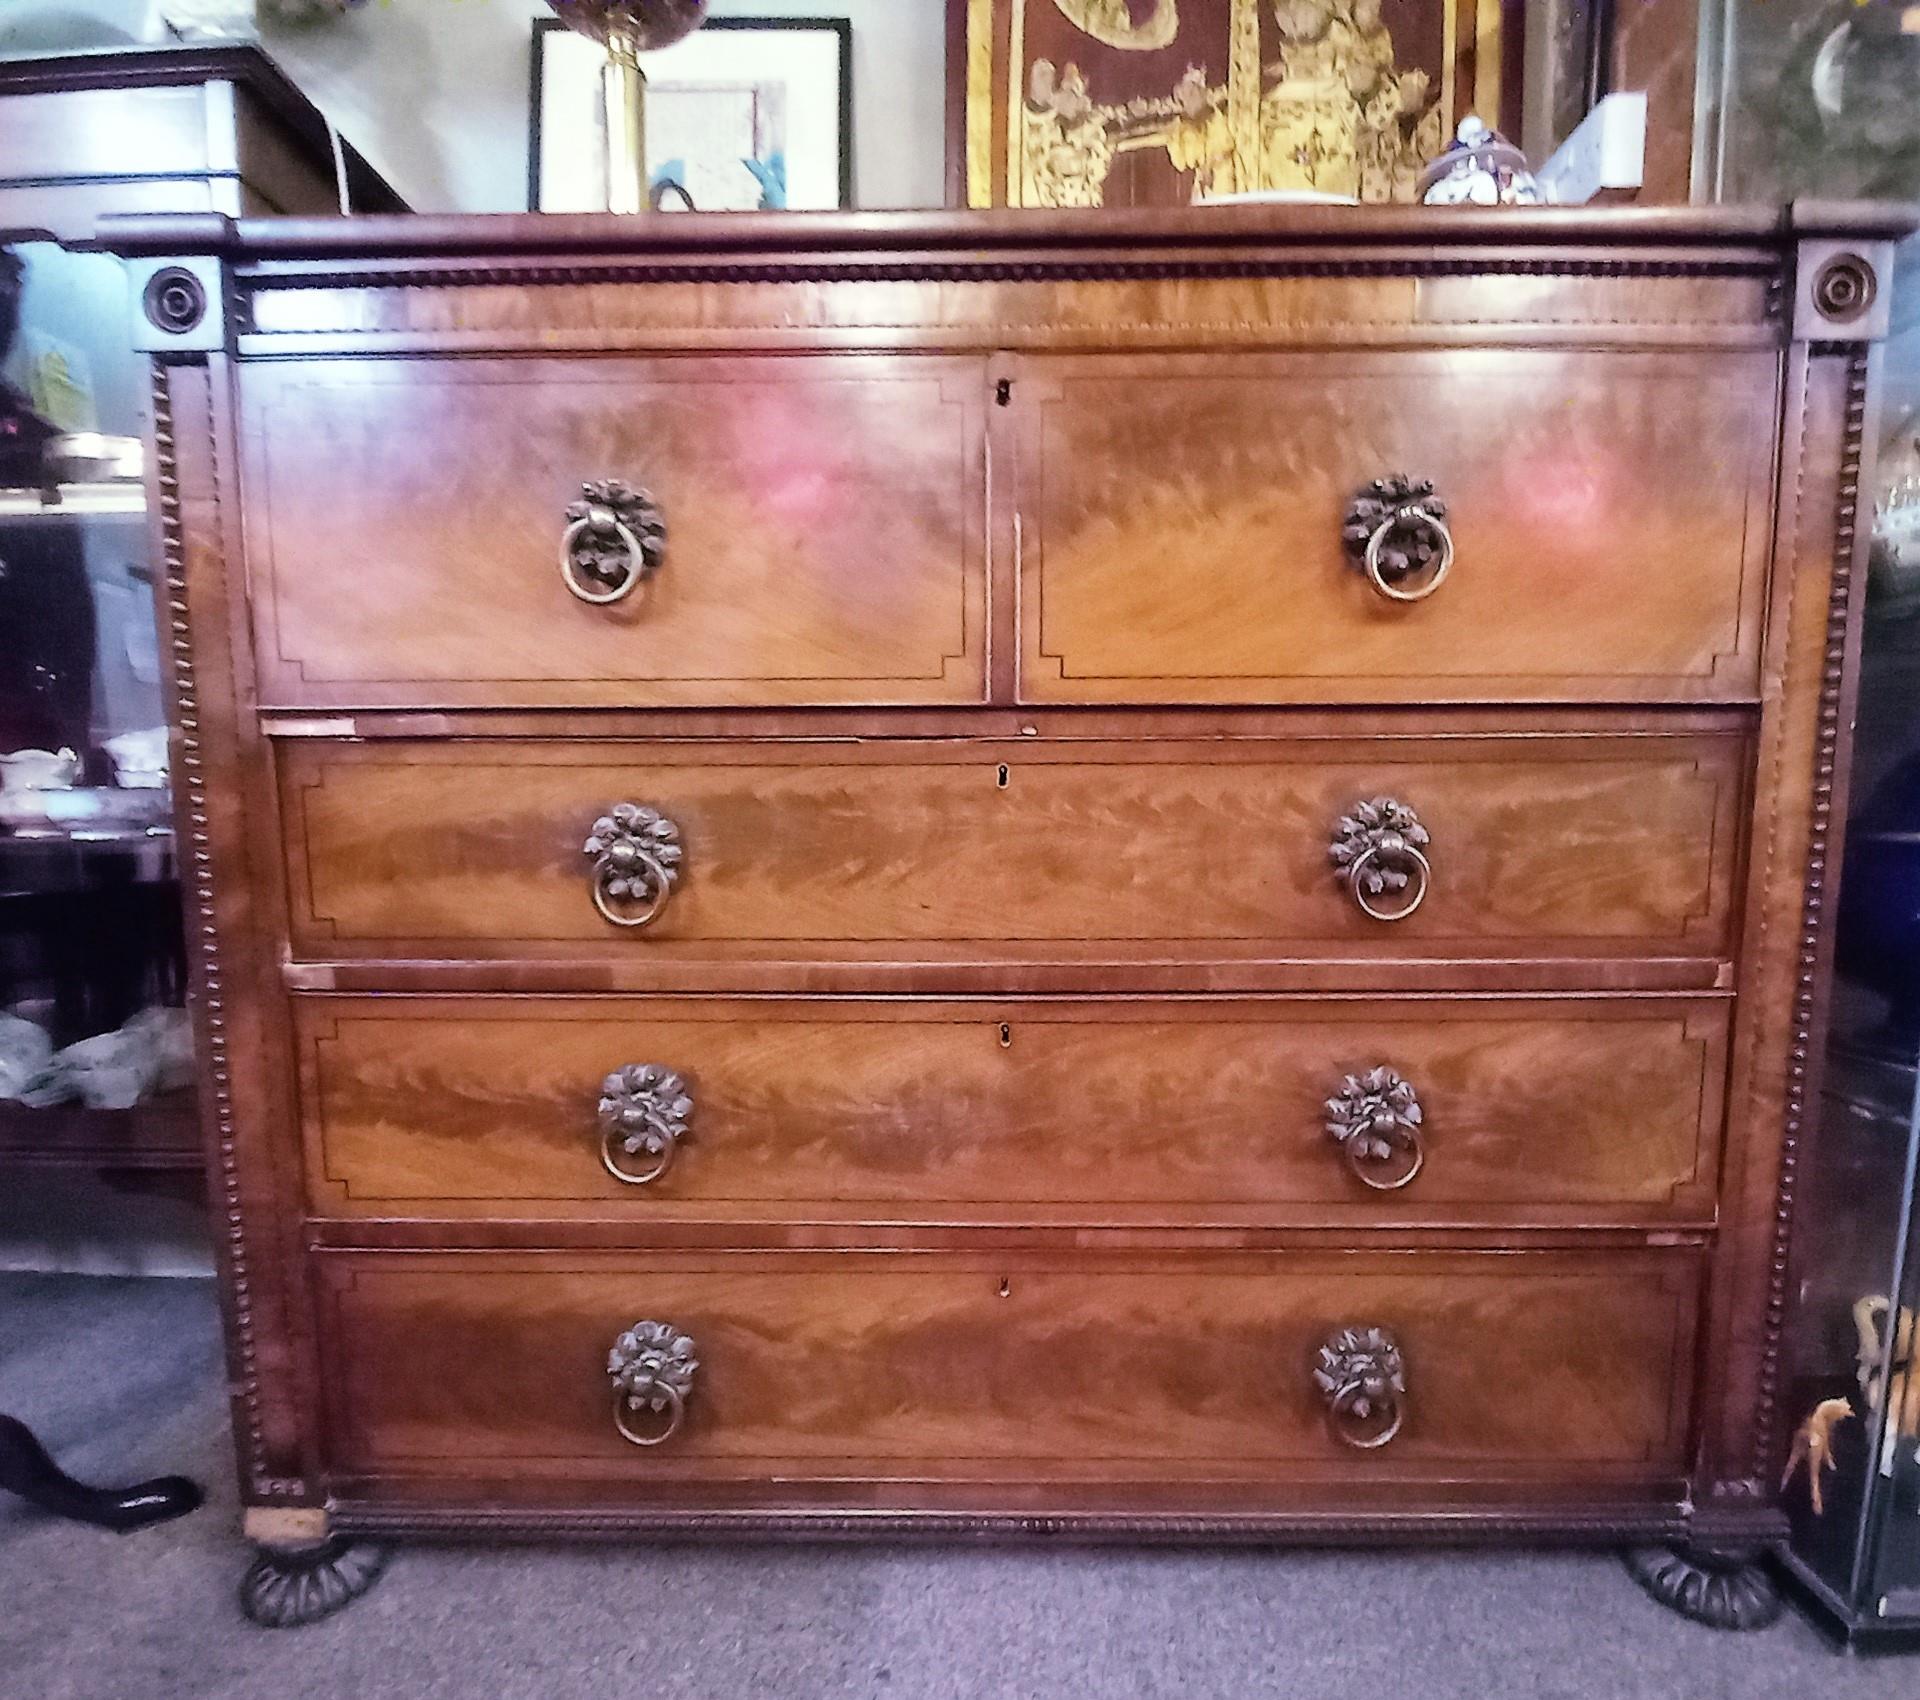 Large mahogany chest of drawers some damage (missing beading in drawer)